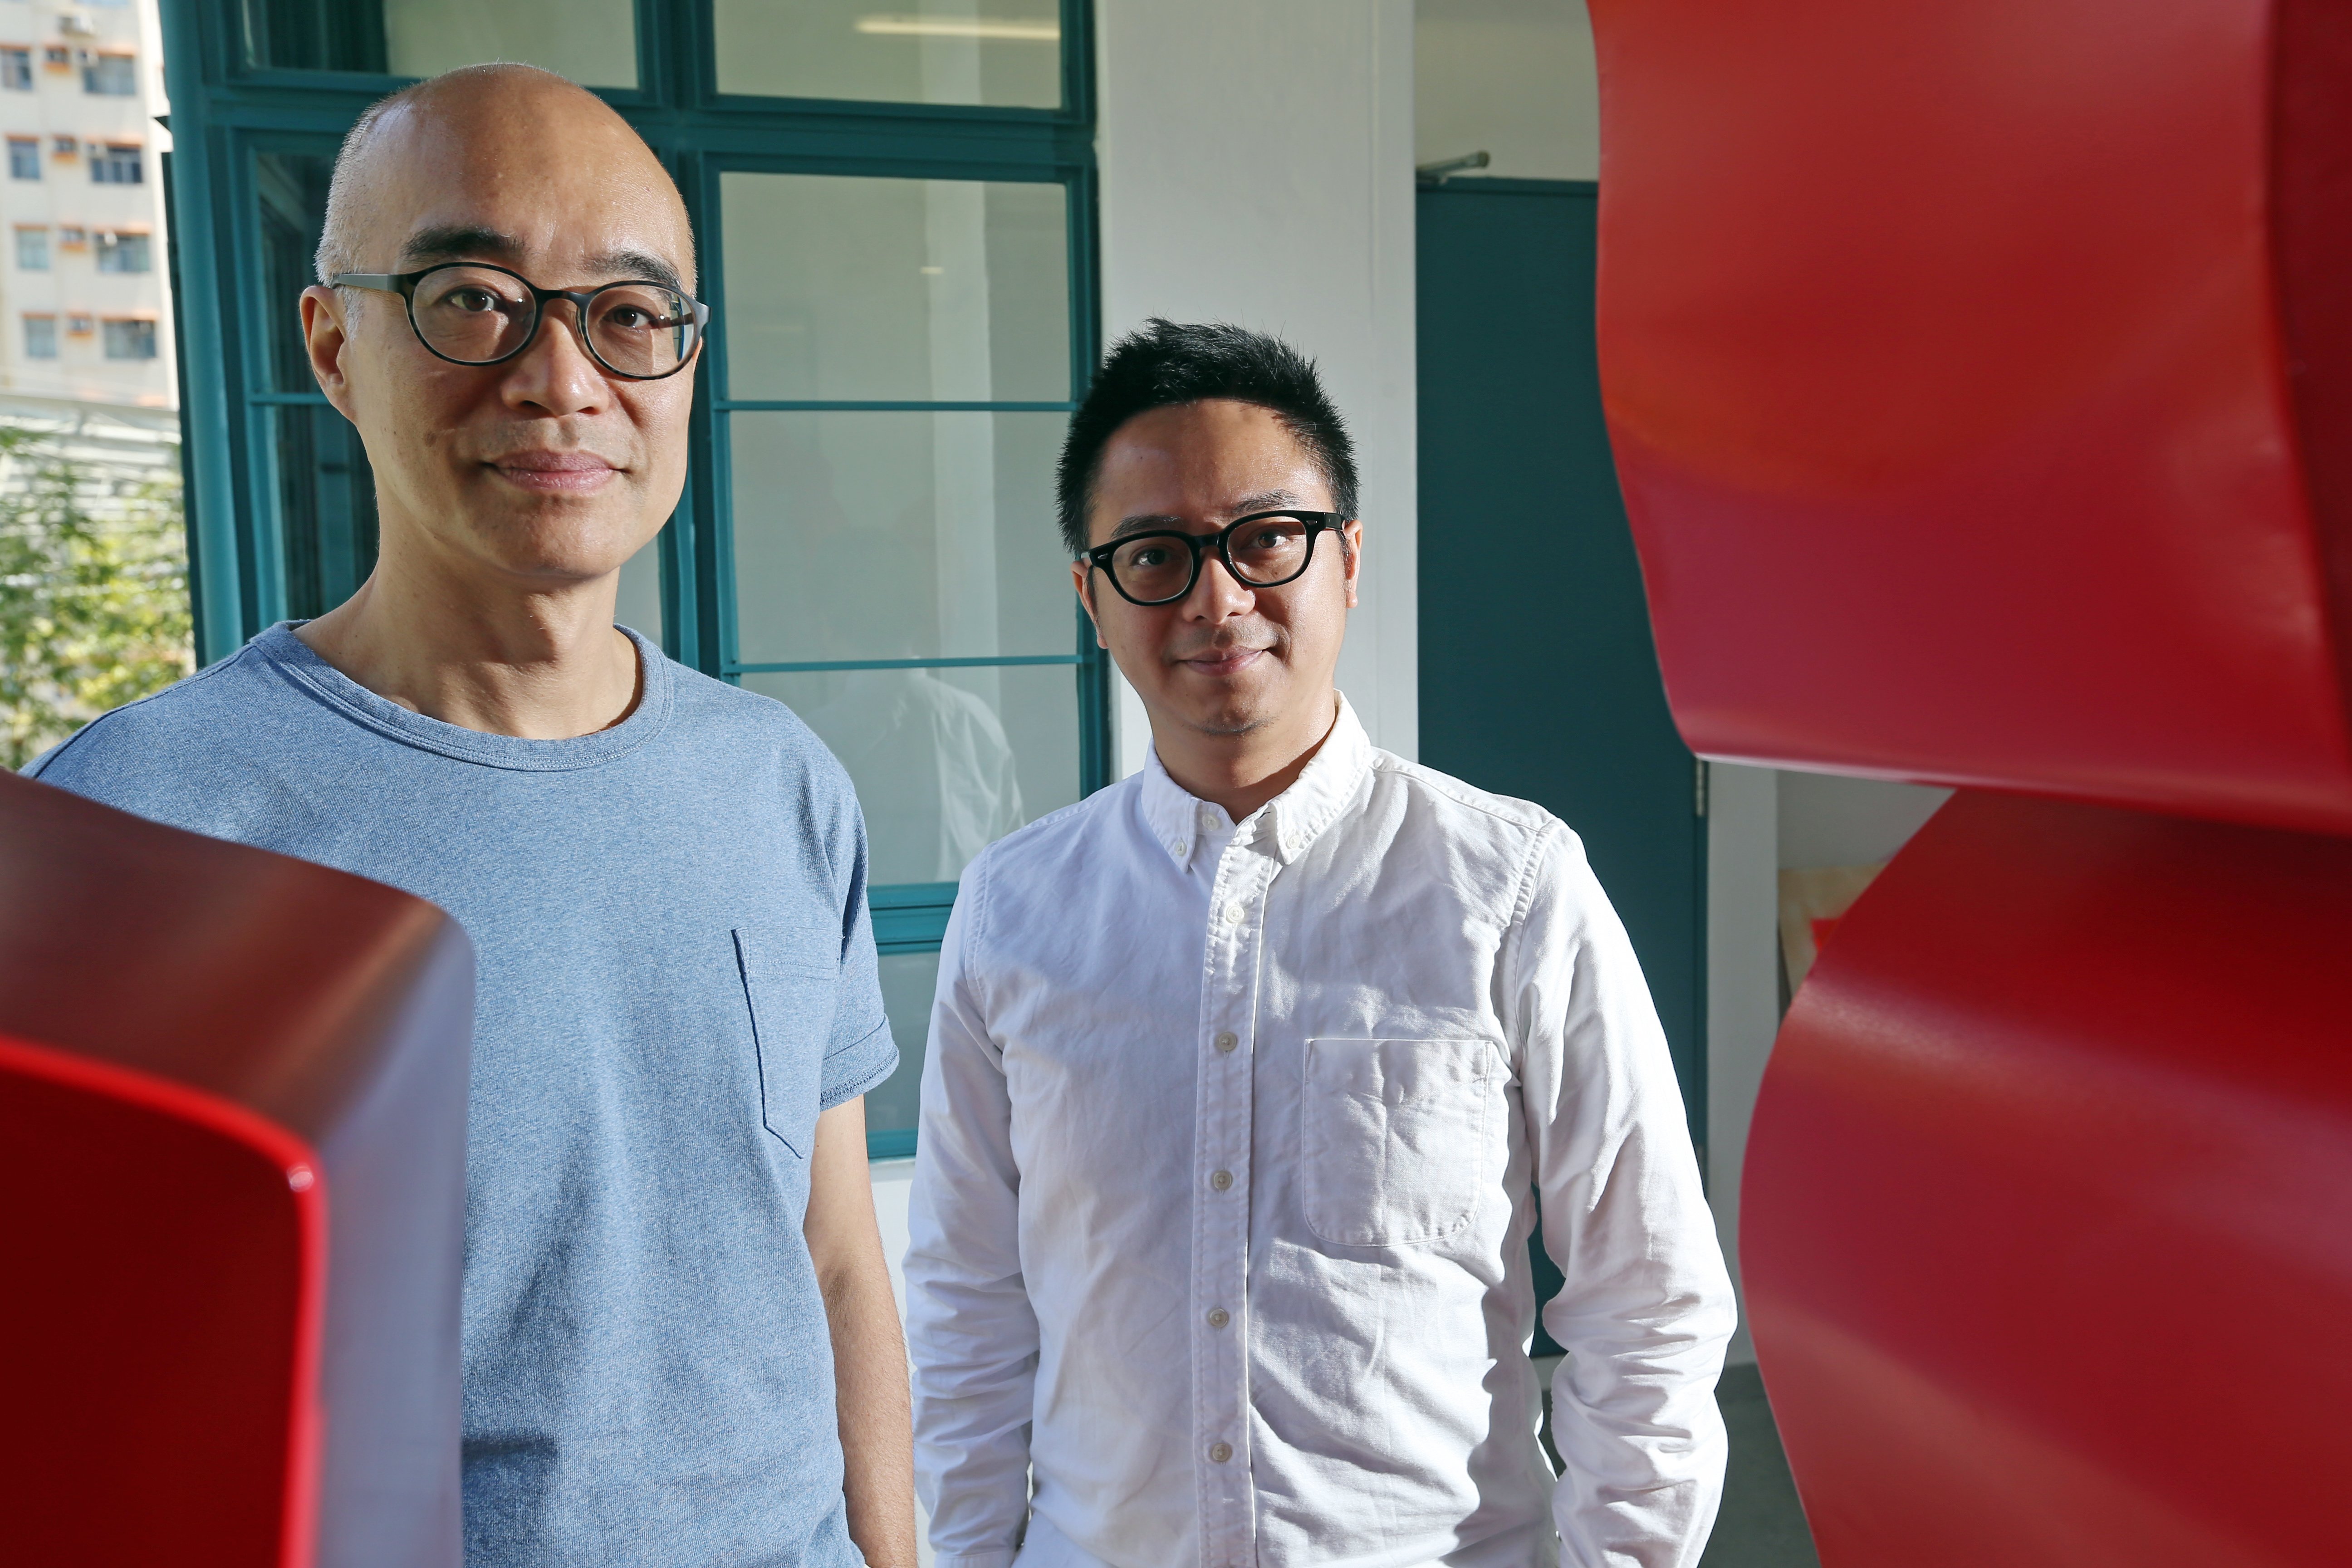 David Yeung (left) and Cedric Chan appear in '1587, A year of no significance'. Photo: K. Y. Cheng